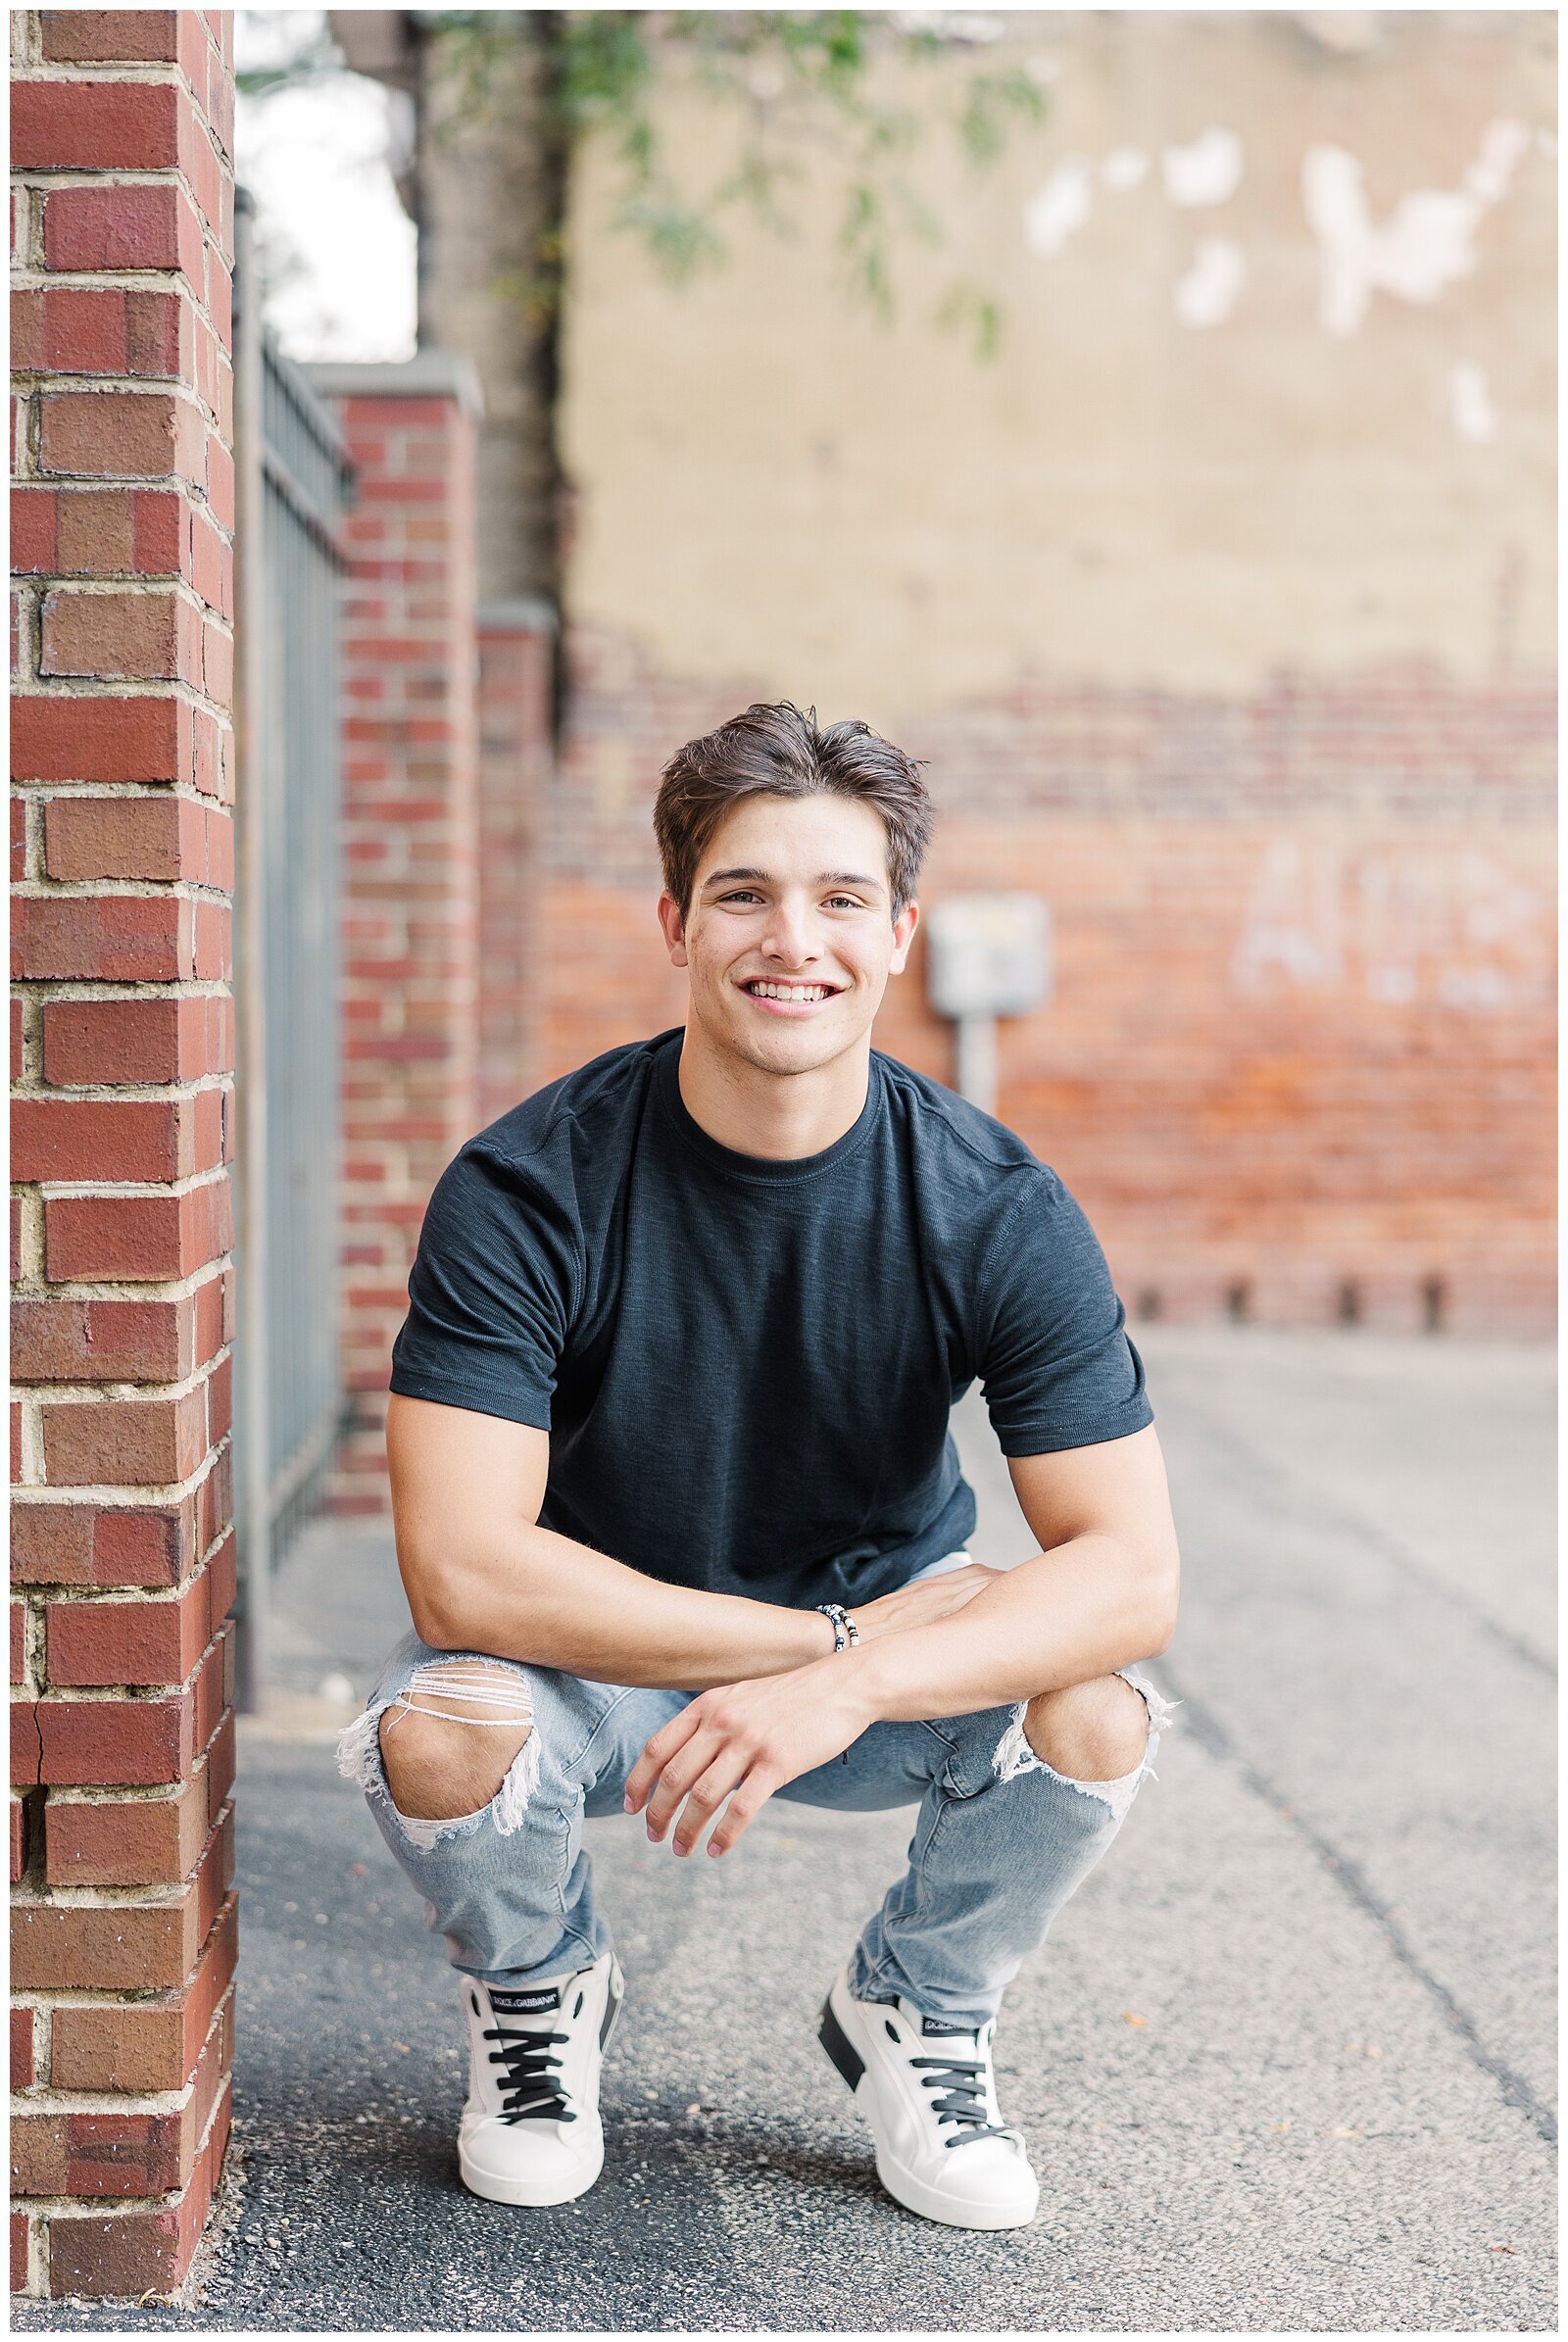 DowntownYoungstownSenior-36